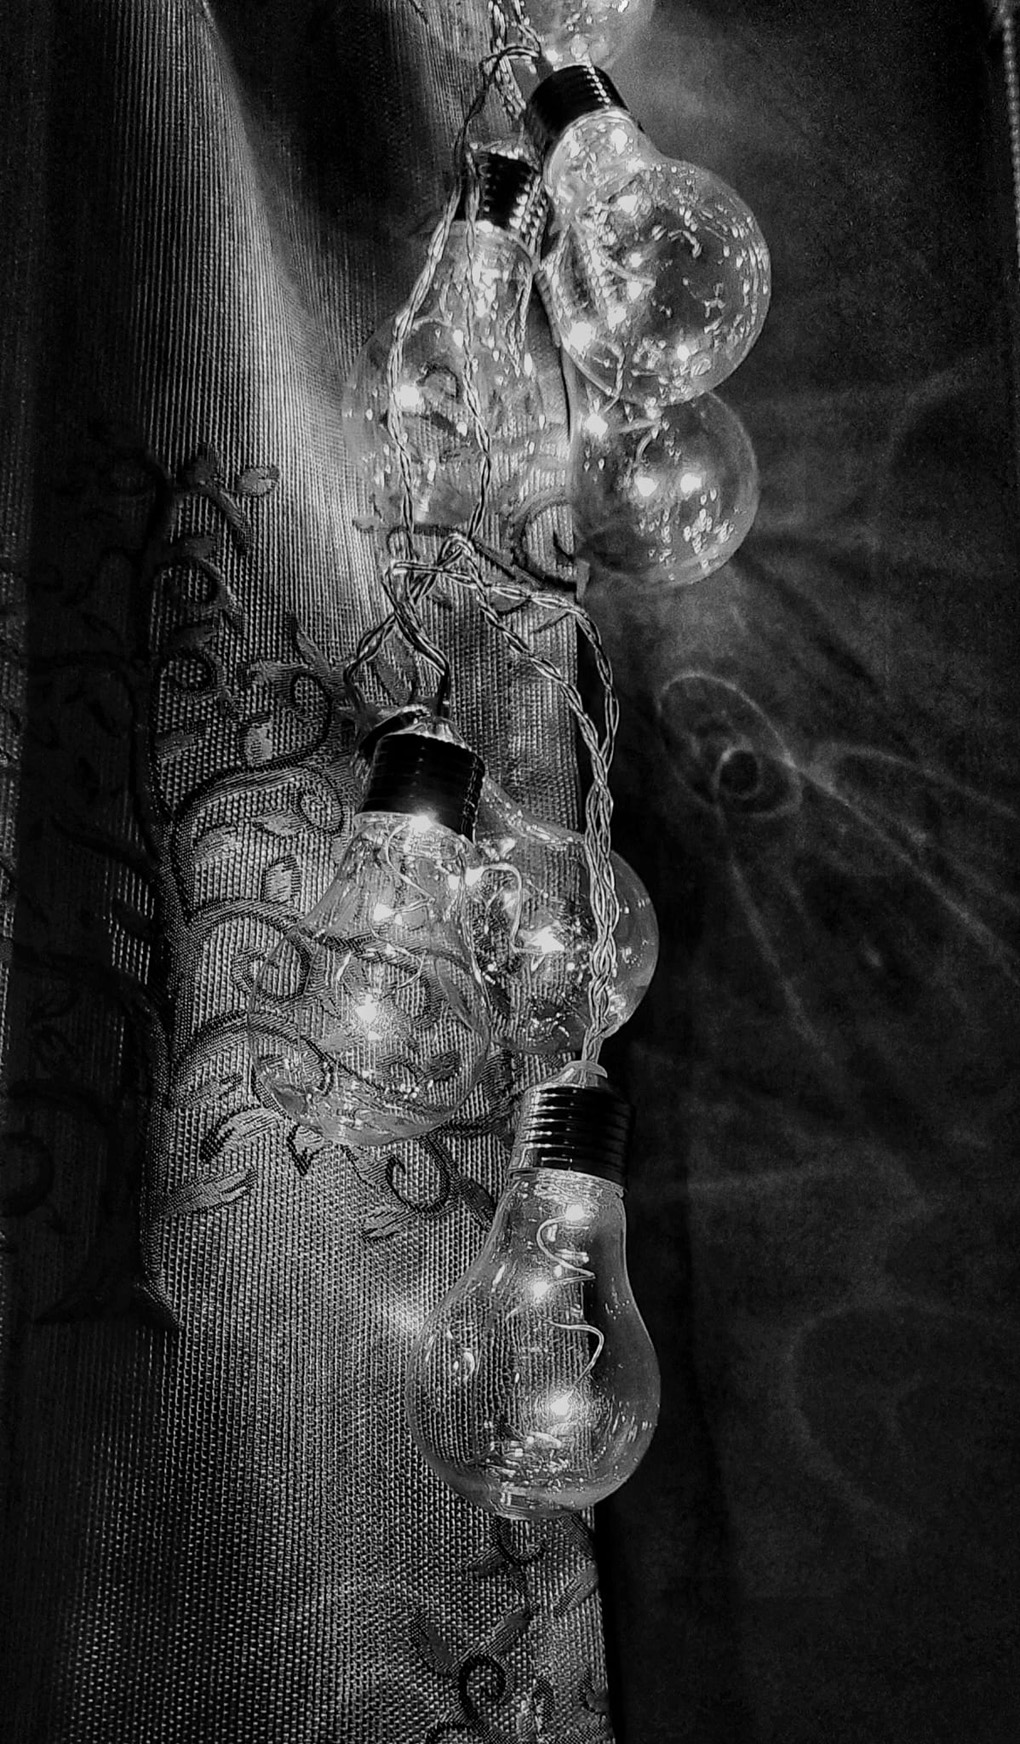 Monochrome image of lights in a window